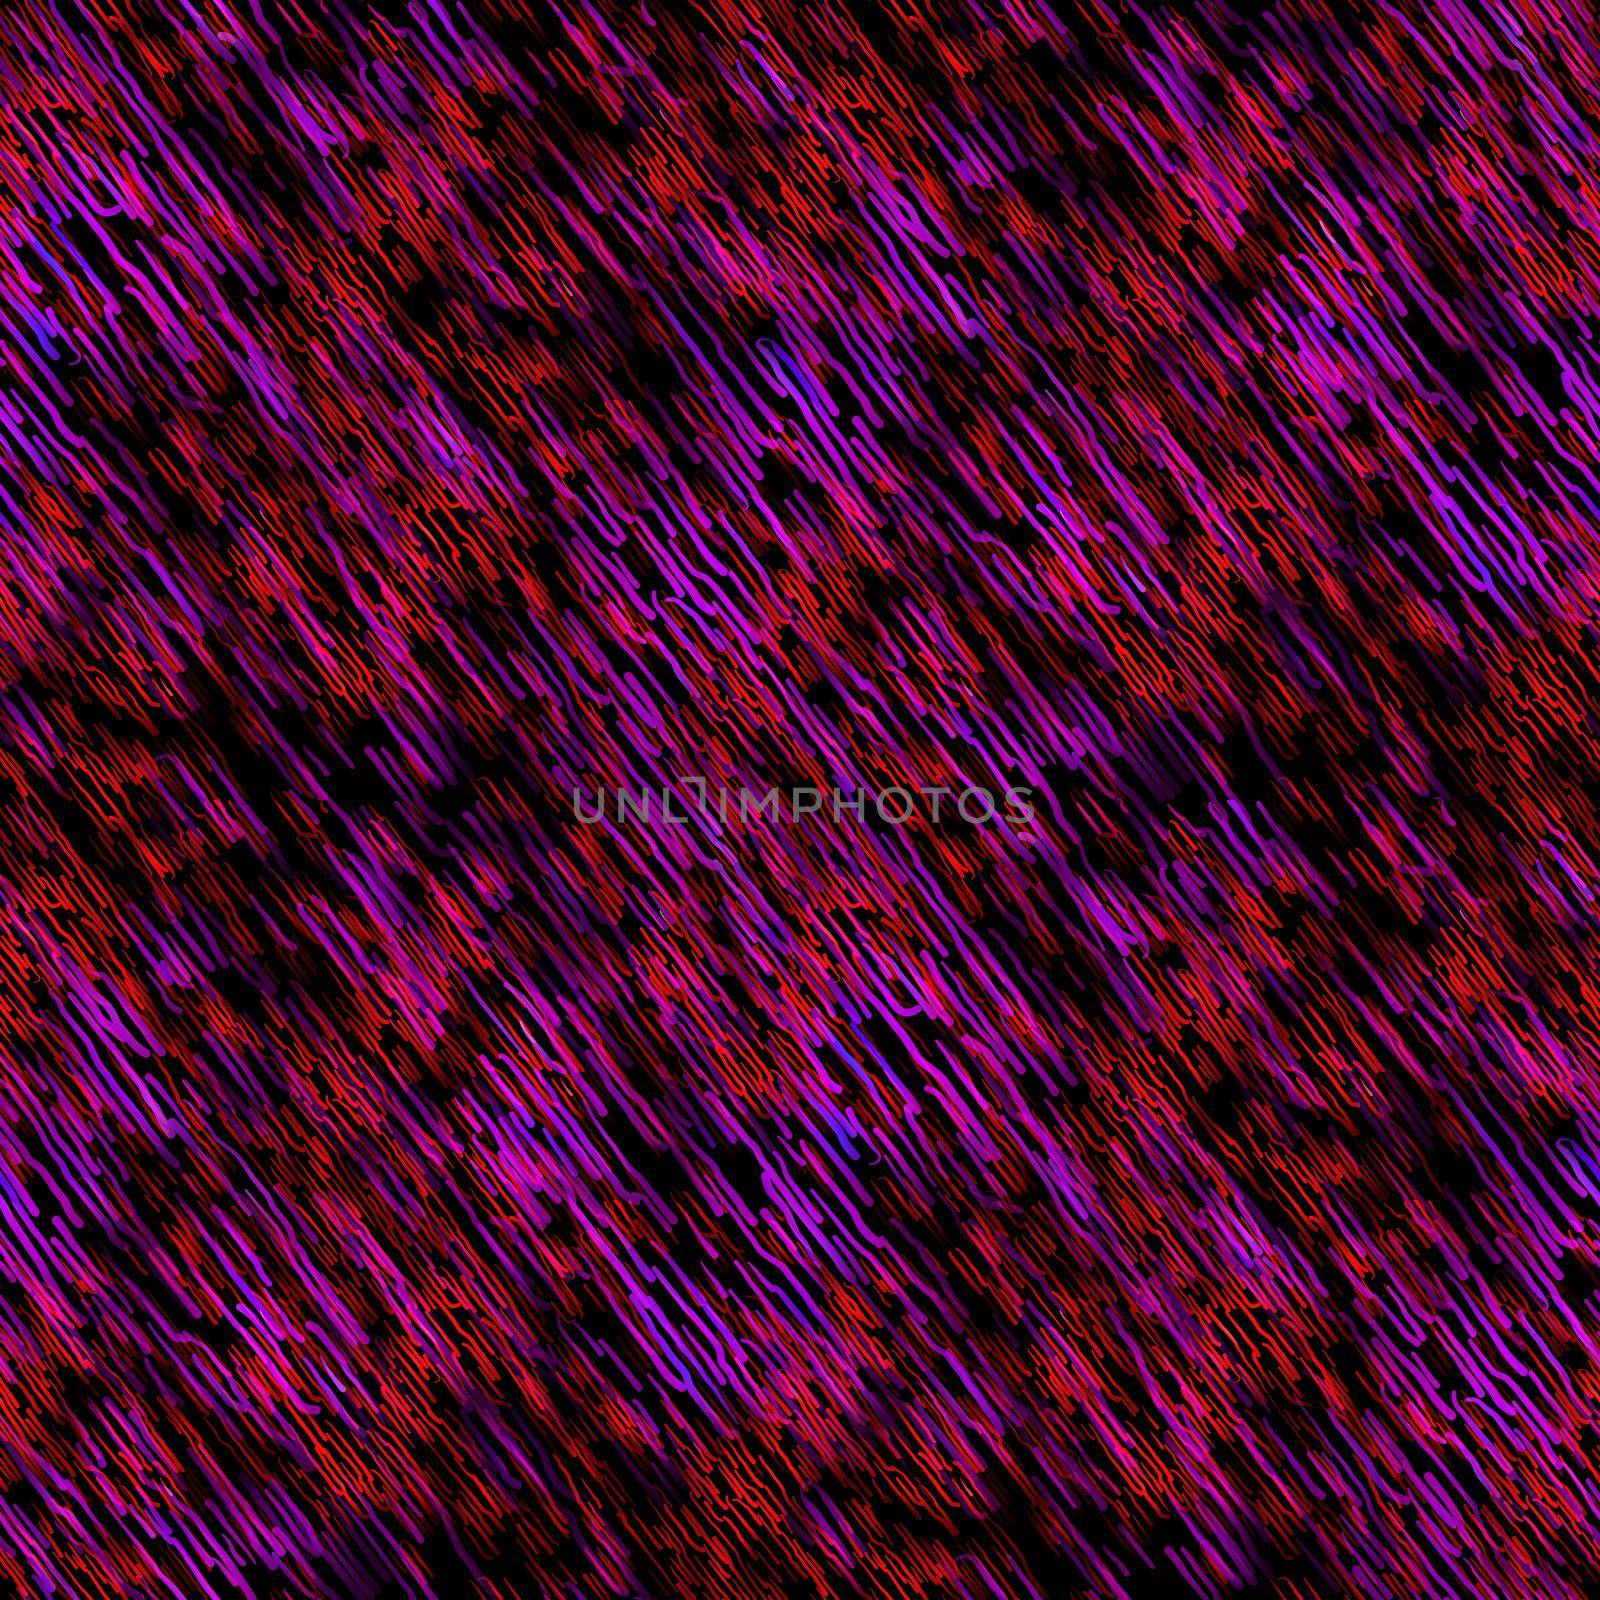 Seamless abstract pattern with abstract red and purple chaotic lines on dark background